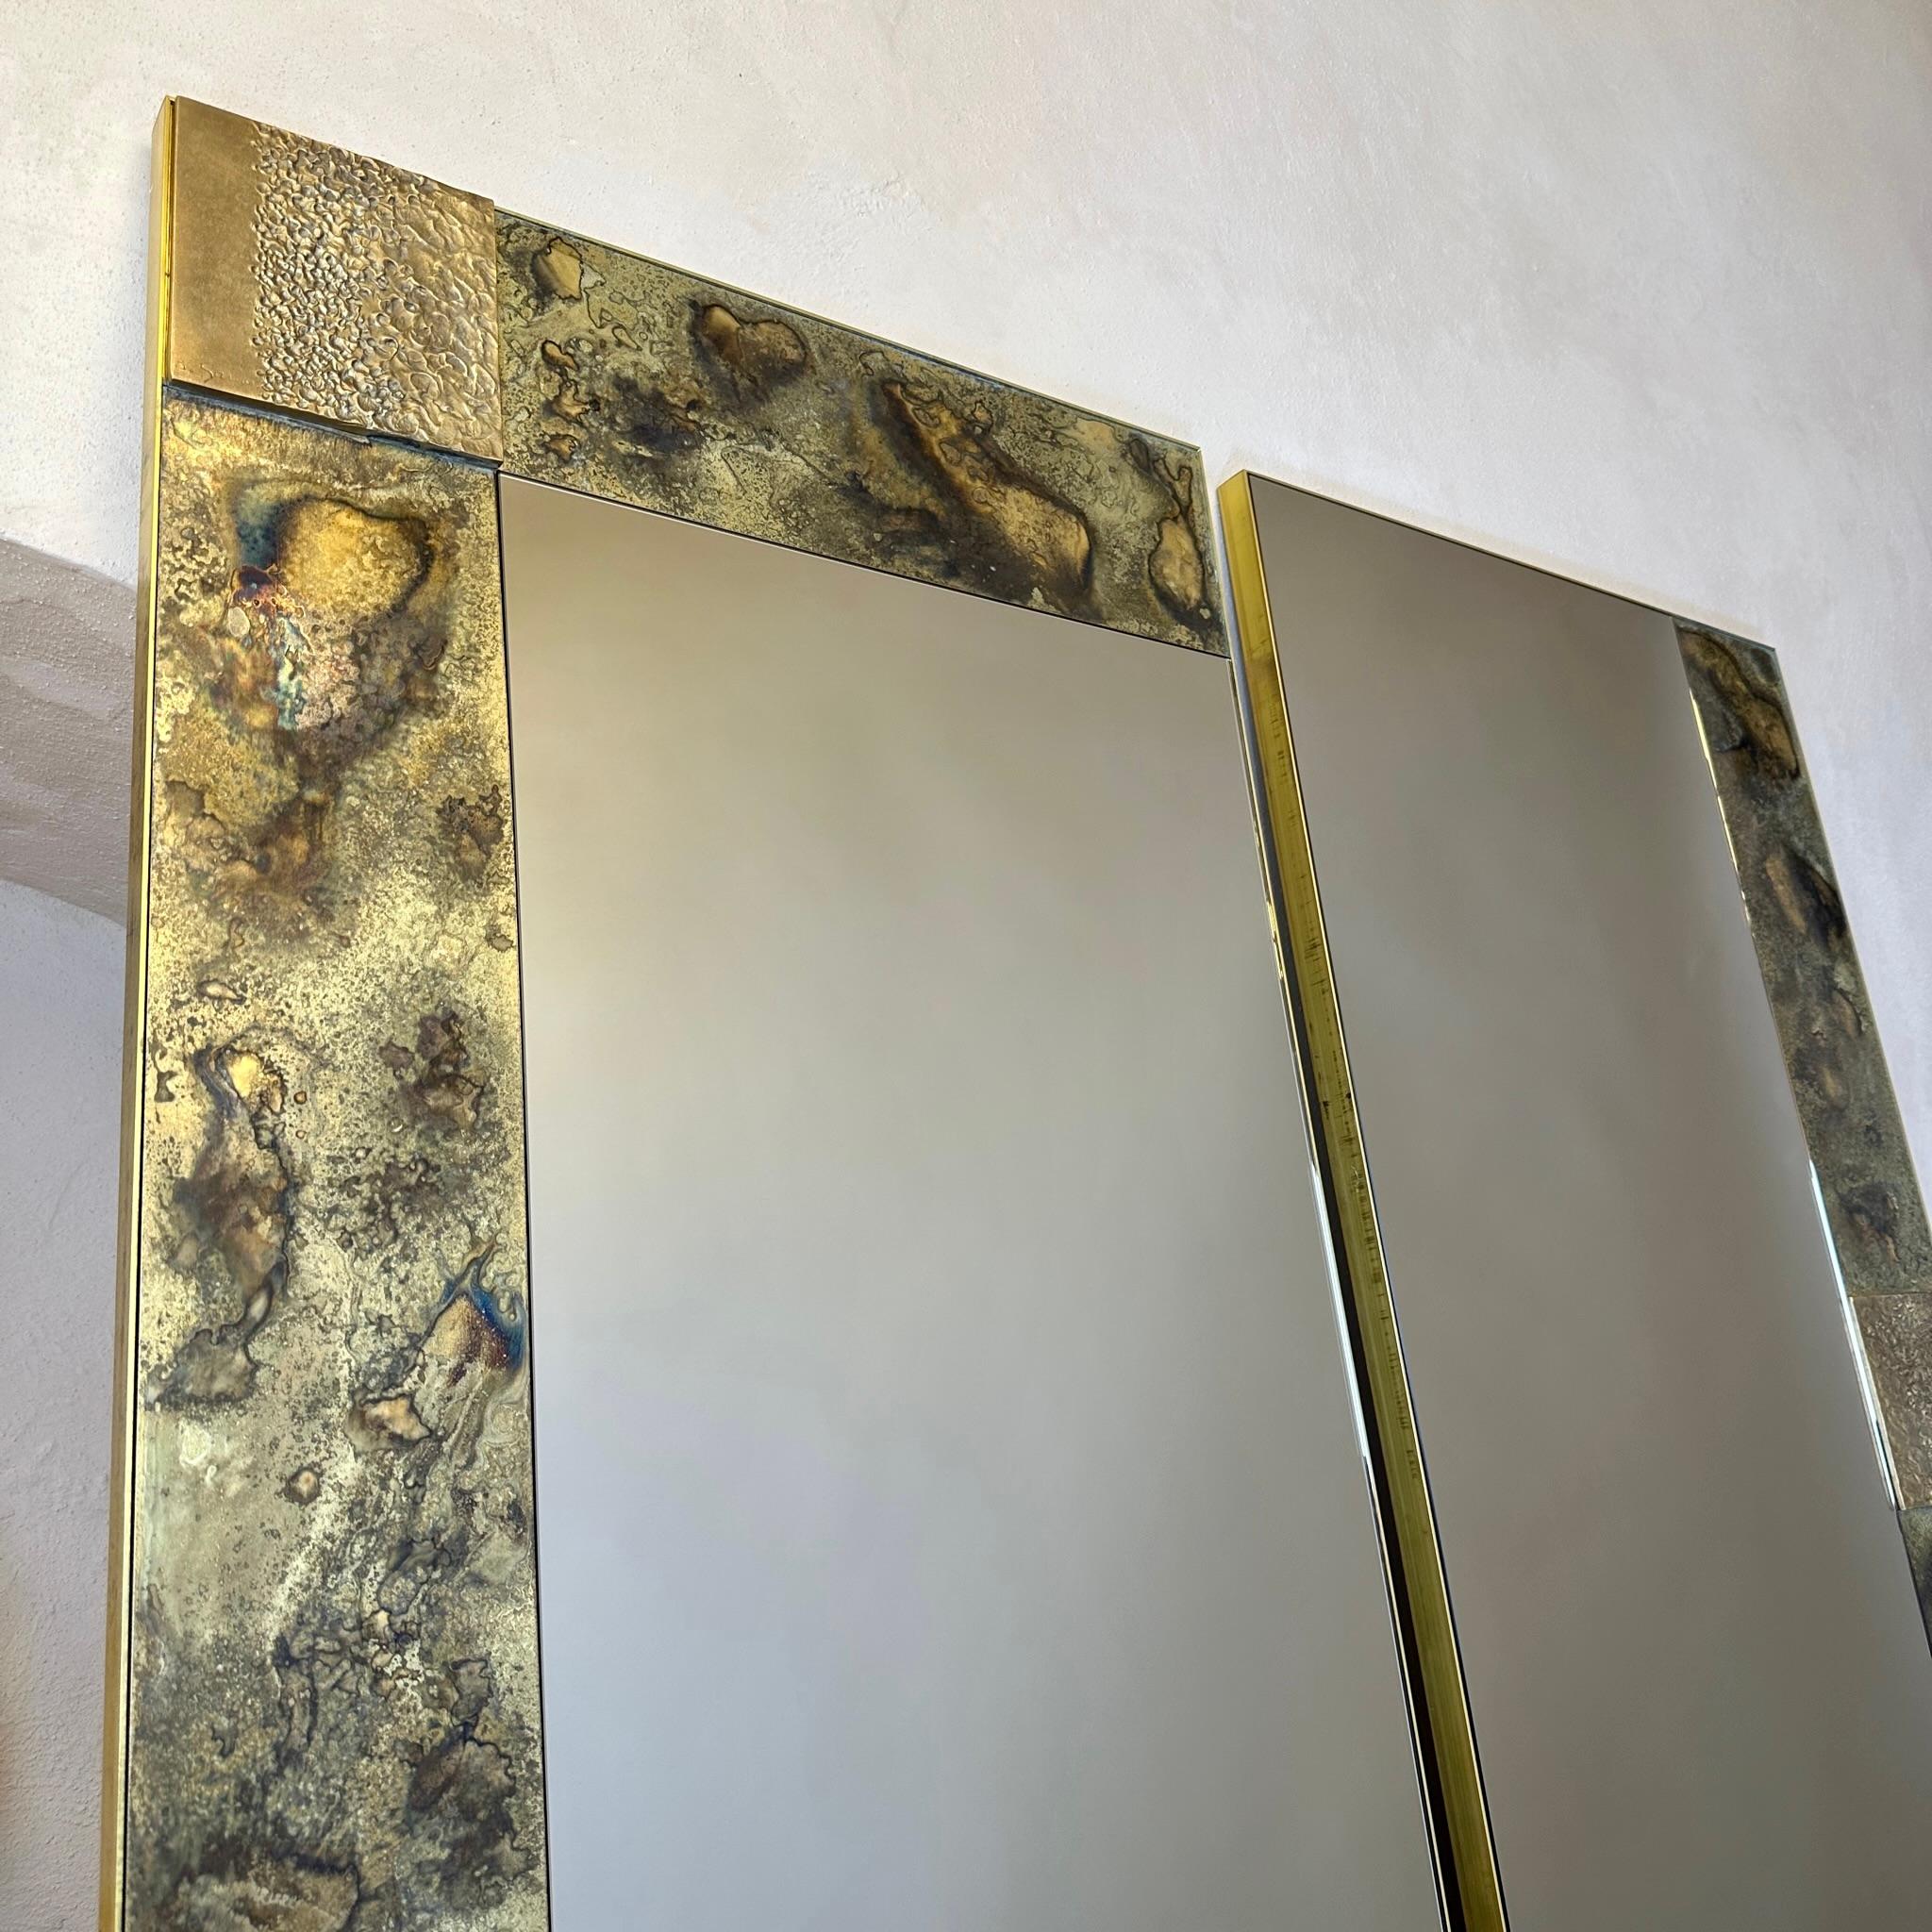 This pair of stunning sculptural bronze mirrors & etched brass w/ bronze abstract plaques and brass frame can be hanged on the wall either in an horizontal or a vertical manner. The two mirrors put together on the wall measure: 120 x 3 x 120 H cm.